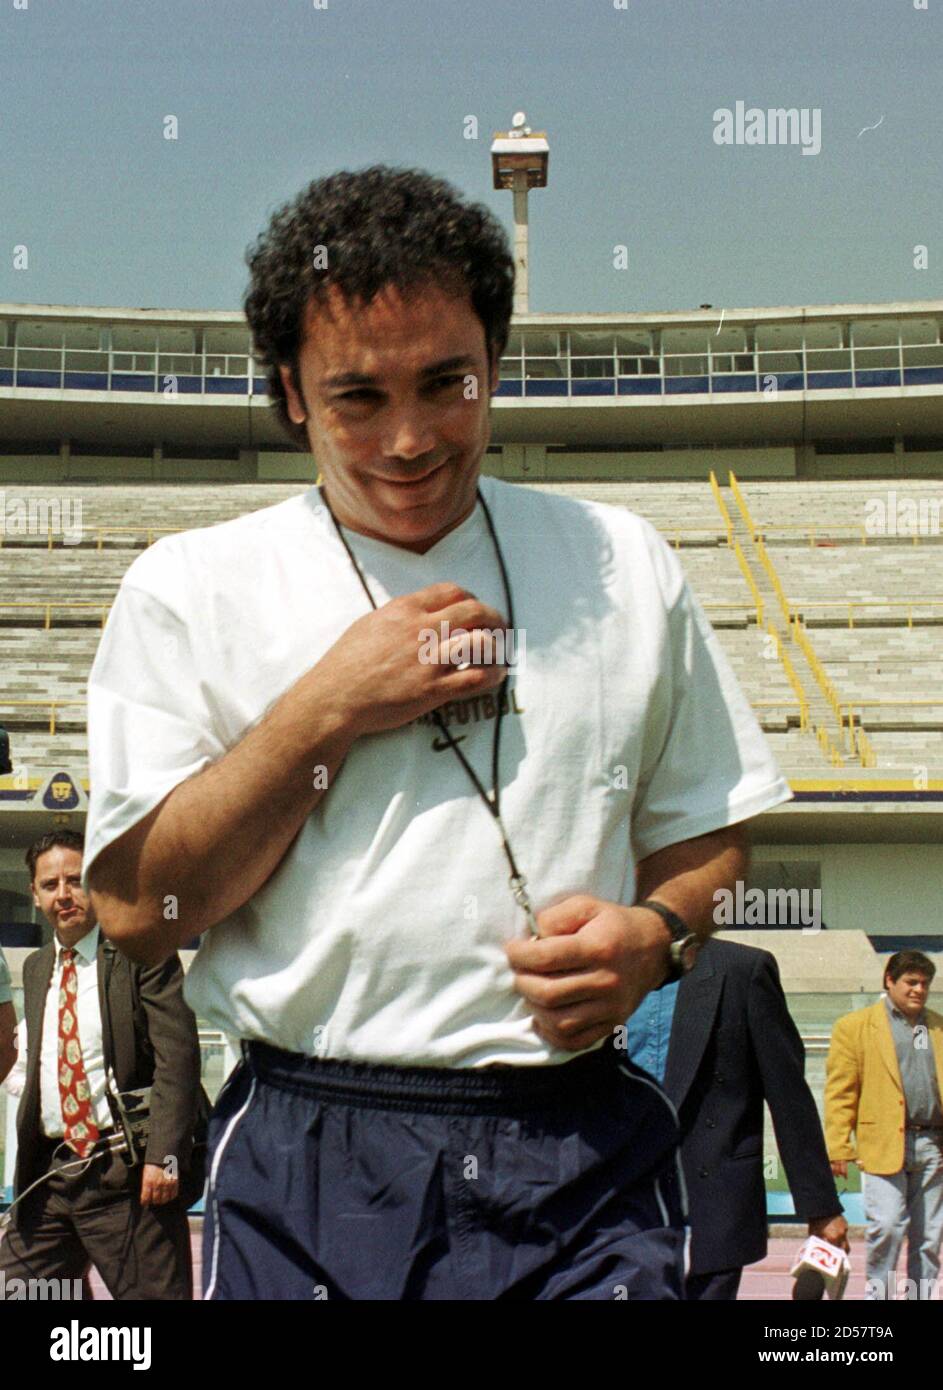 Former Mexican soccer star Hugo Sanchez persigns as he enters the pitch  during his presentation as the new coach of the soccer team Pumas, which  belongs to the National Autonomous University of